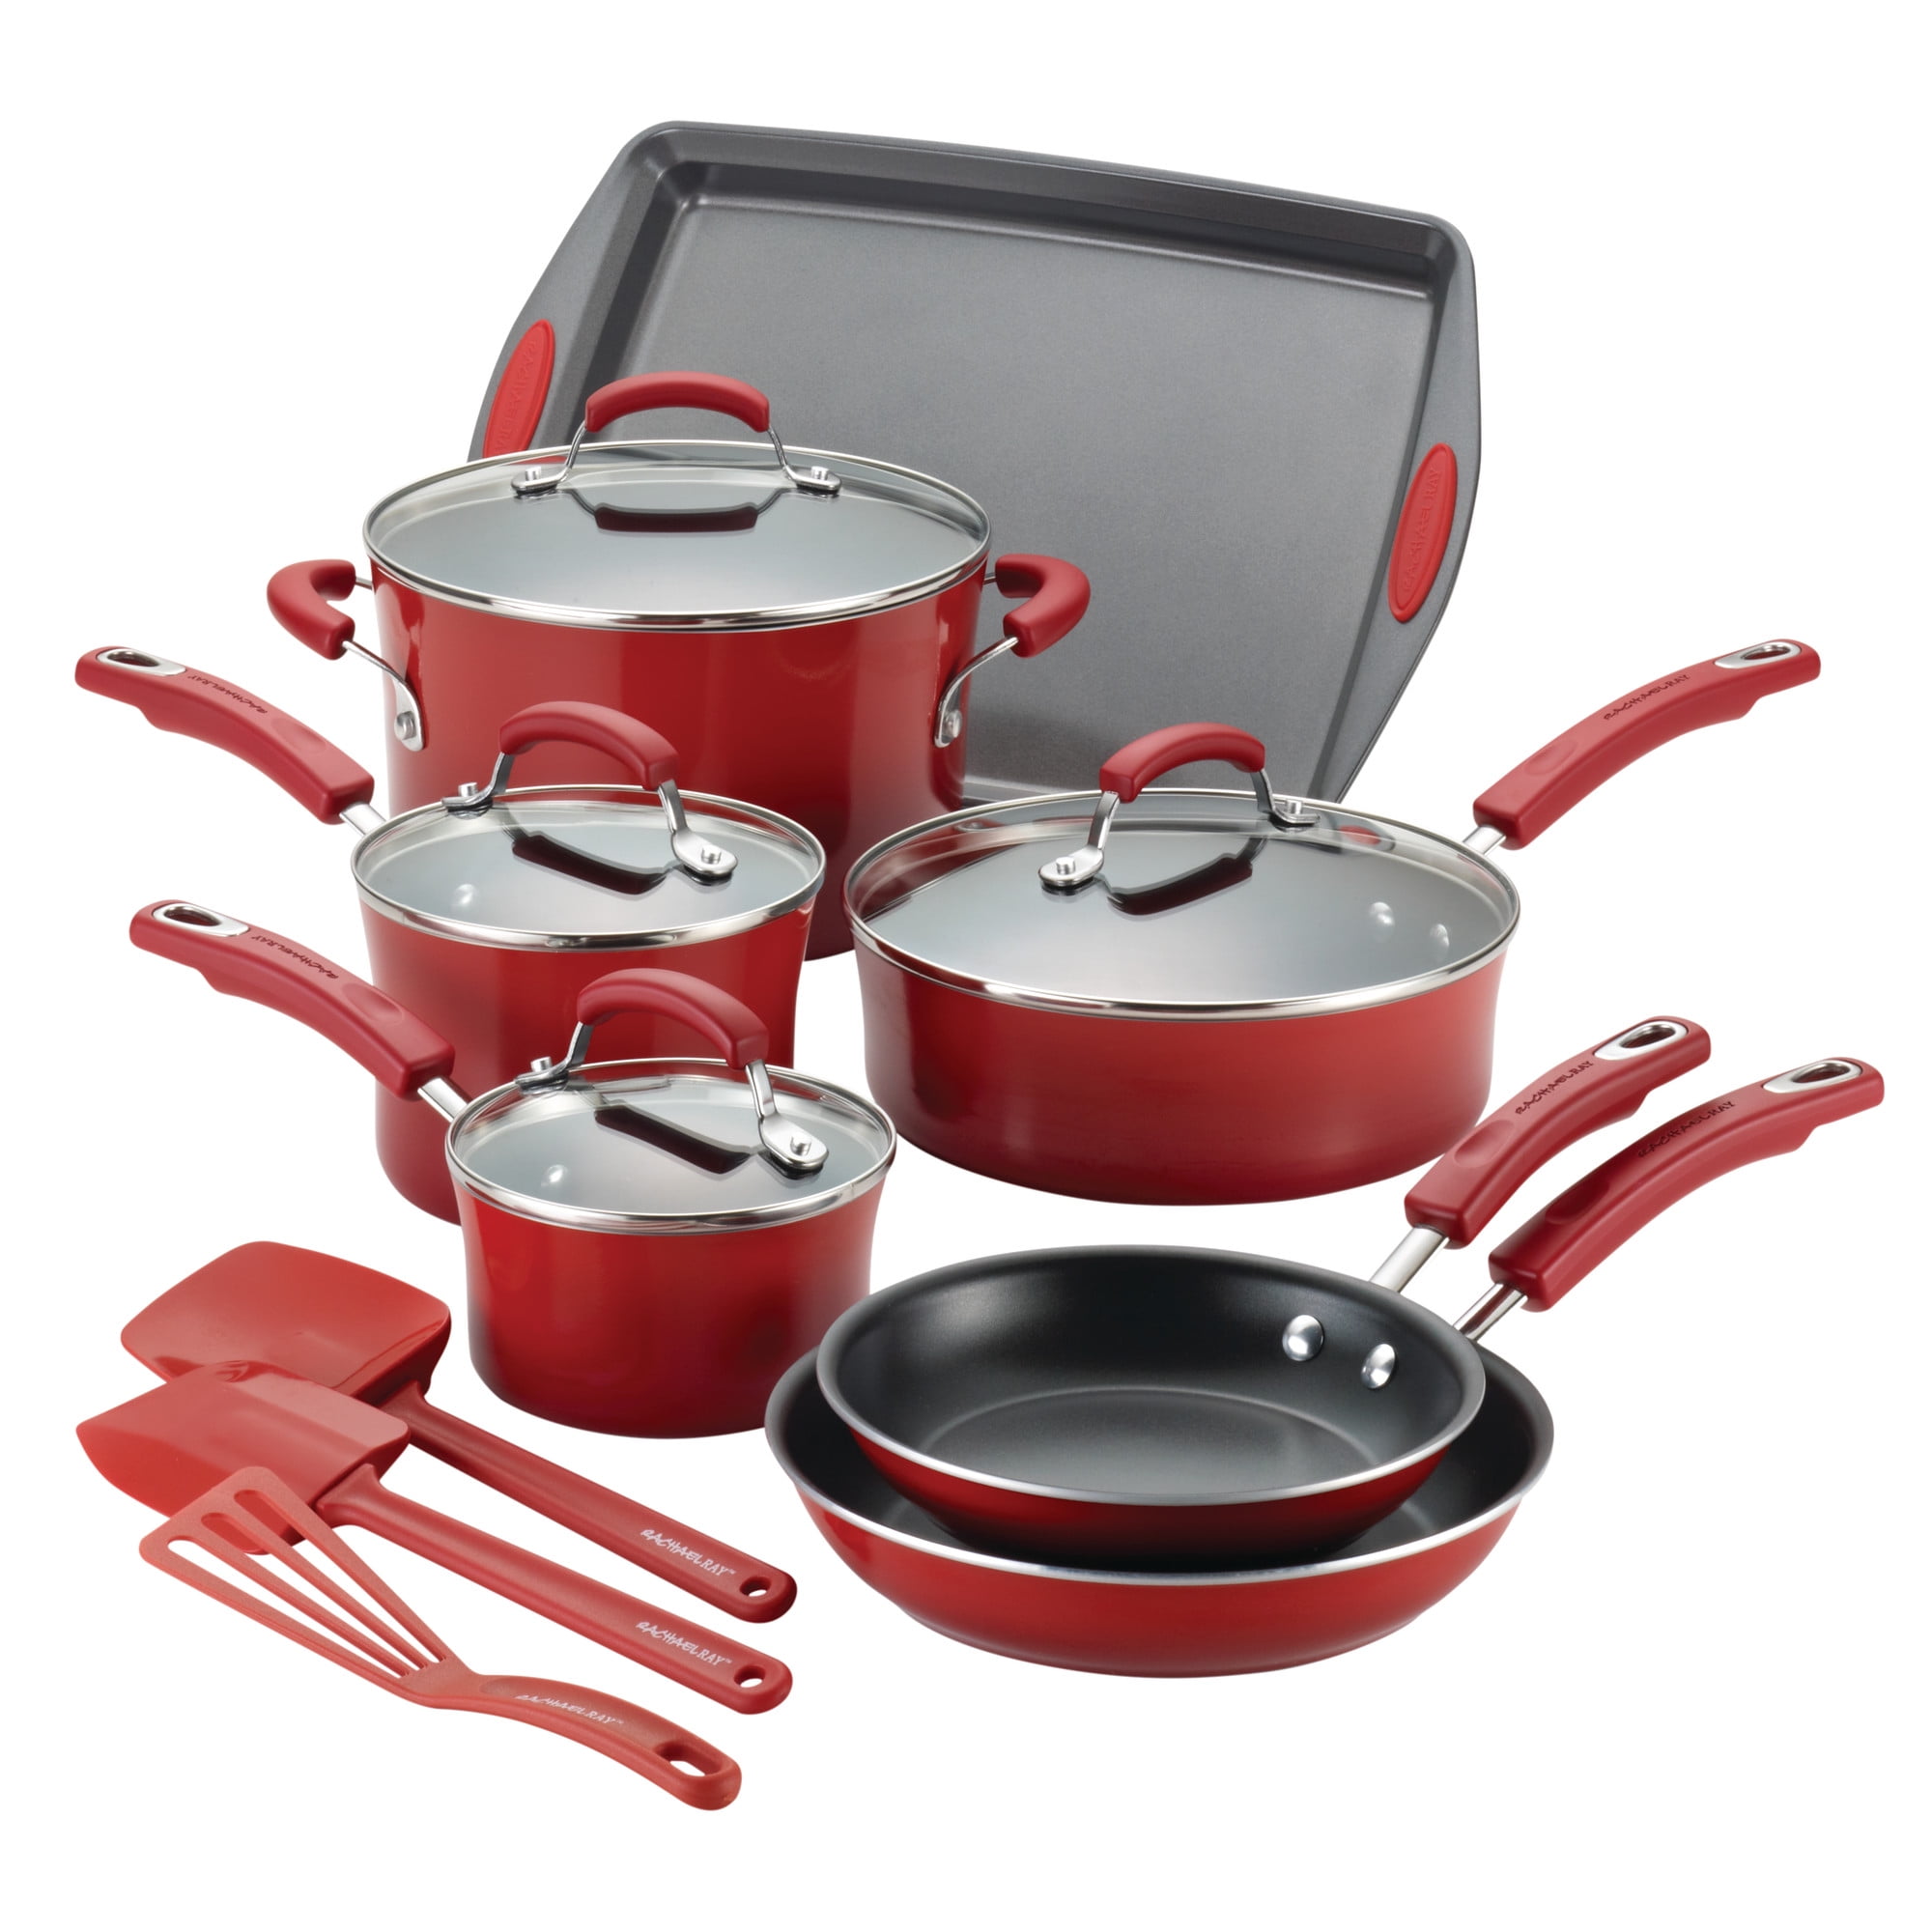 Rachael Ray 14-Piece Classic Bright's Nonstick Pots and Pans Set, Cookware  Set with Bakeware and Utensils, Gradient Orange 